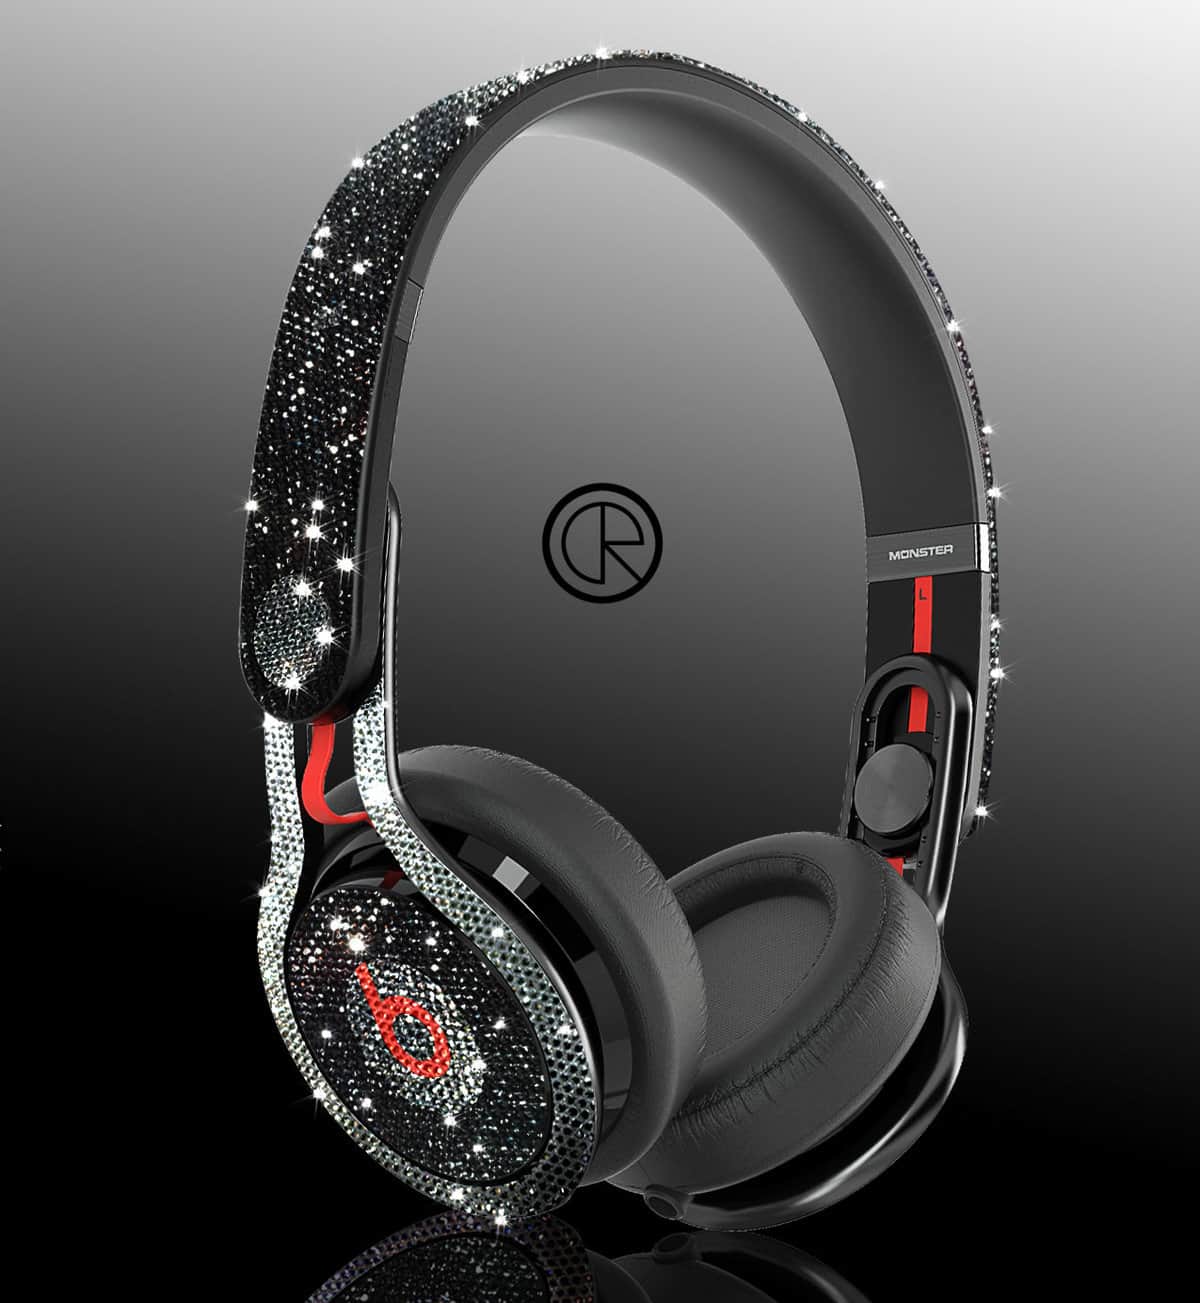 Dr Dre Mixr headphones by Crystal Rocked